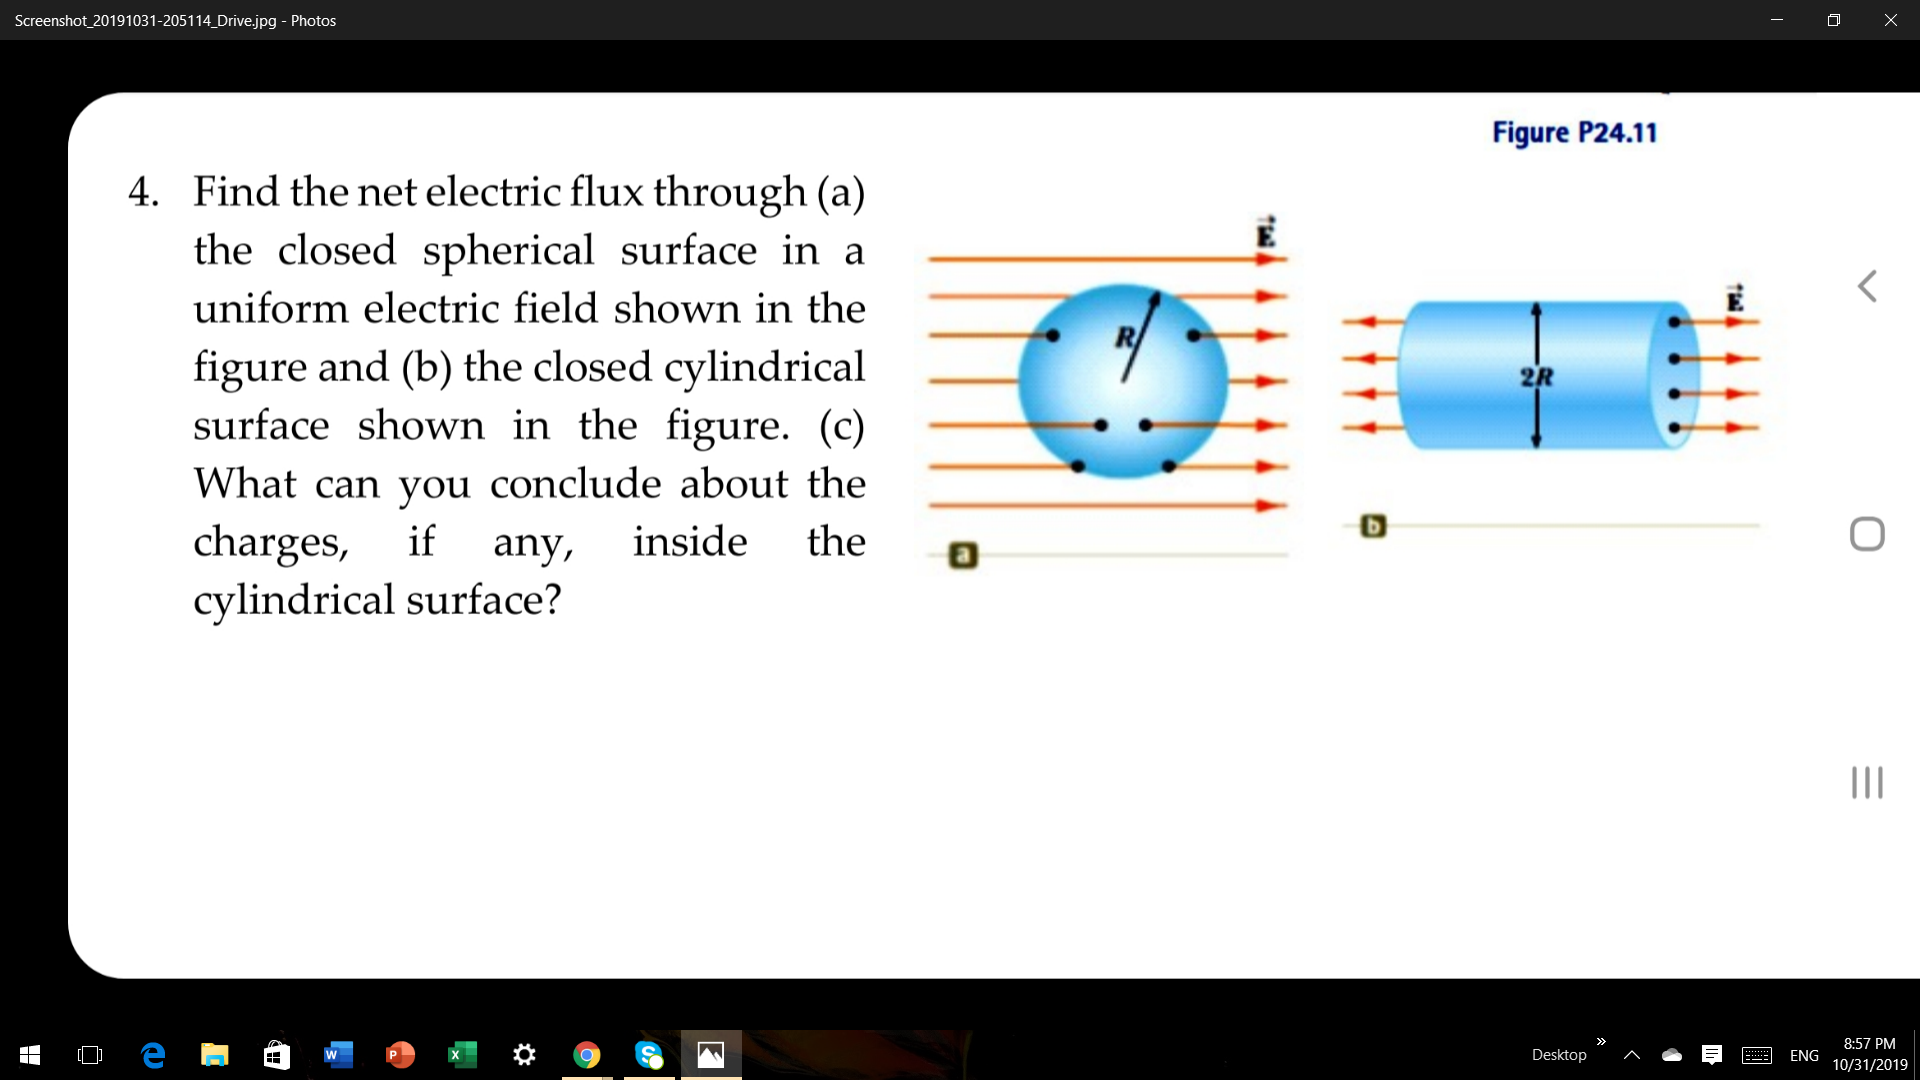 Screenshot_20191031-205114_Drive.jpg Photos
Figure P24.11
Find the net electric flux through (a)
4.
the closed spherical surface in a
uniform electric field shown in the
figure and (b) the closed cylindrical
surface shown in the figure. (c)
2R
What can you conclude about the
charges,
cylindrical surface?
if
inside
the
any,
8:57 PM
O e
Desktop
ENG
W
10/31/2019
